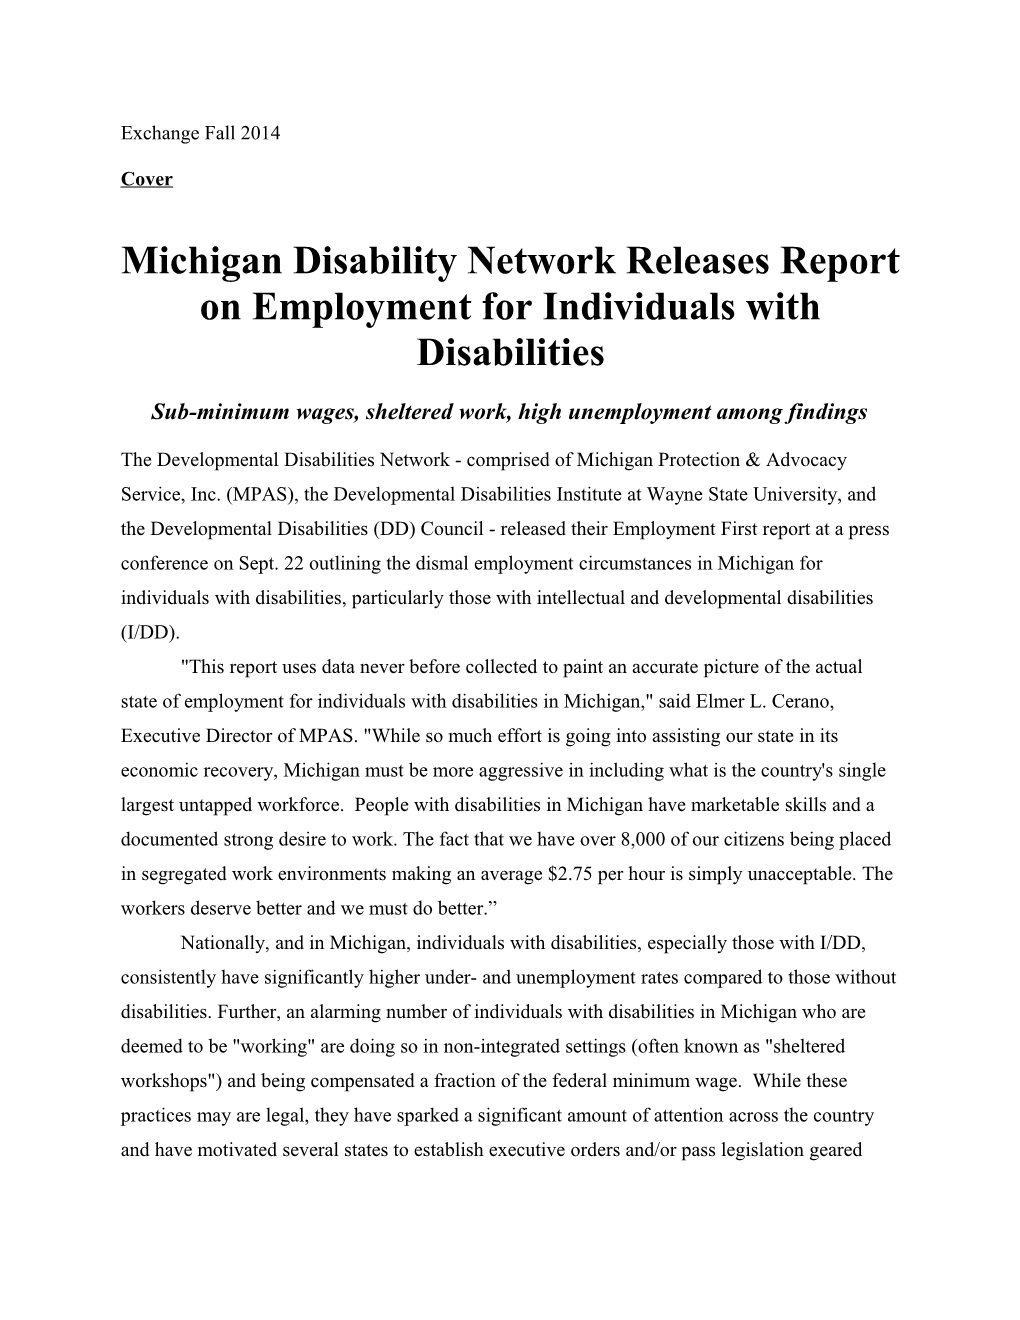 Michigan Disability Network Releases Report on Employment for Individuals with Disabilities